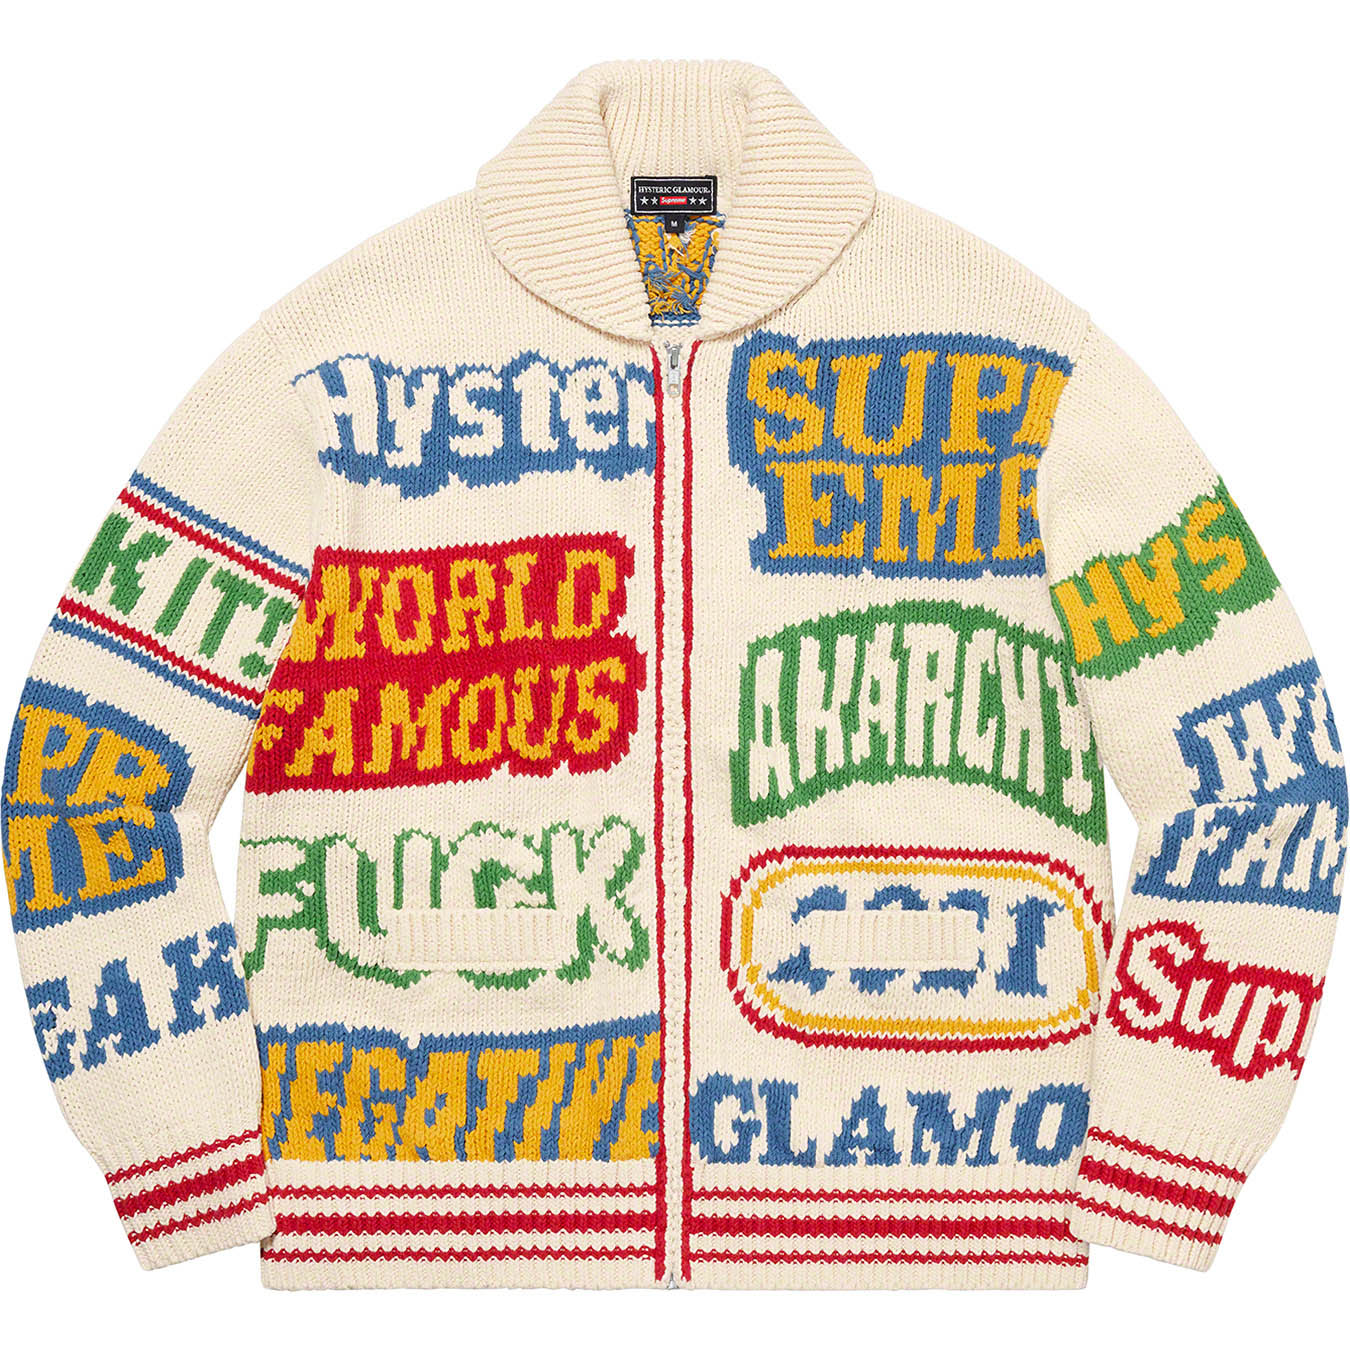 Supreme®/HYSTERIC GLAMOUR Logos Zip Up Sweater